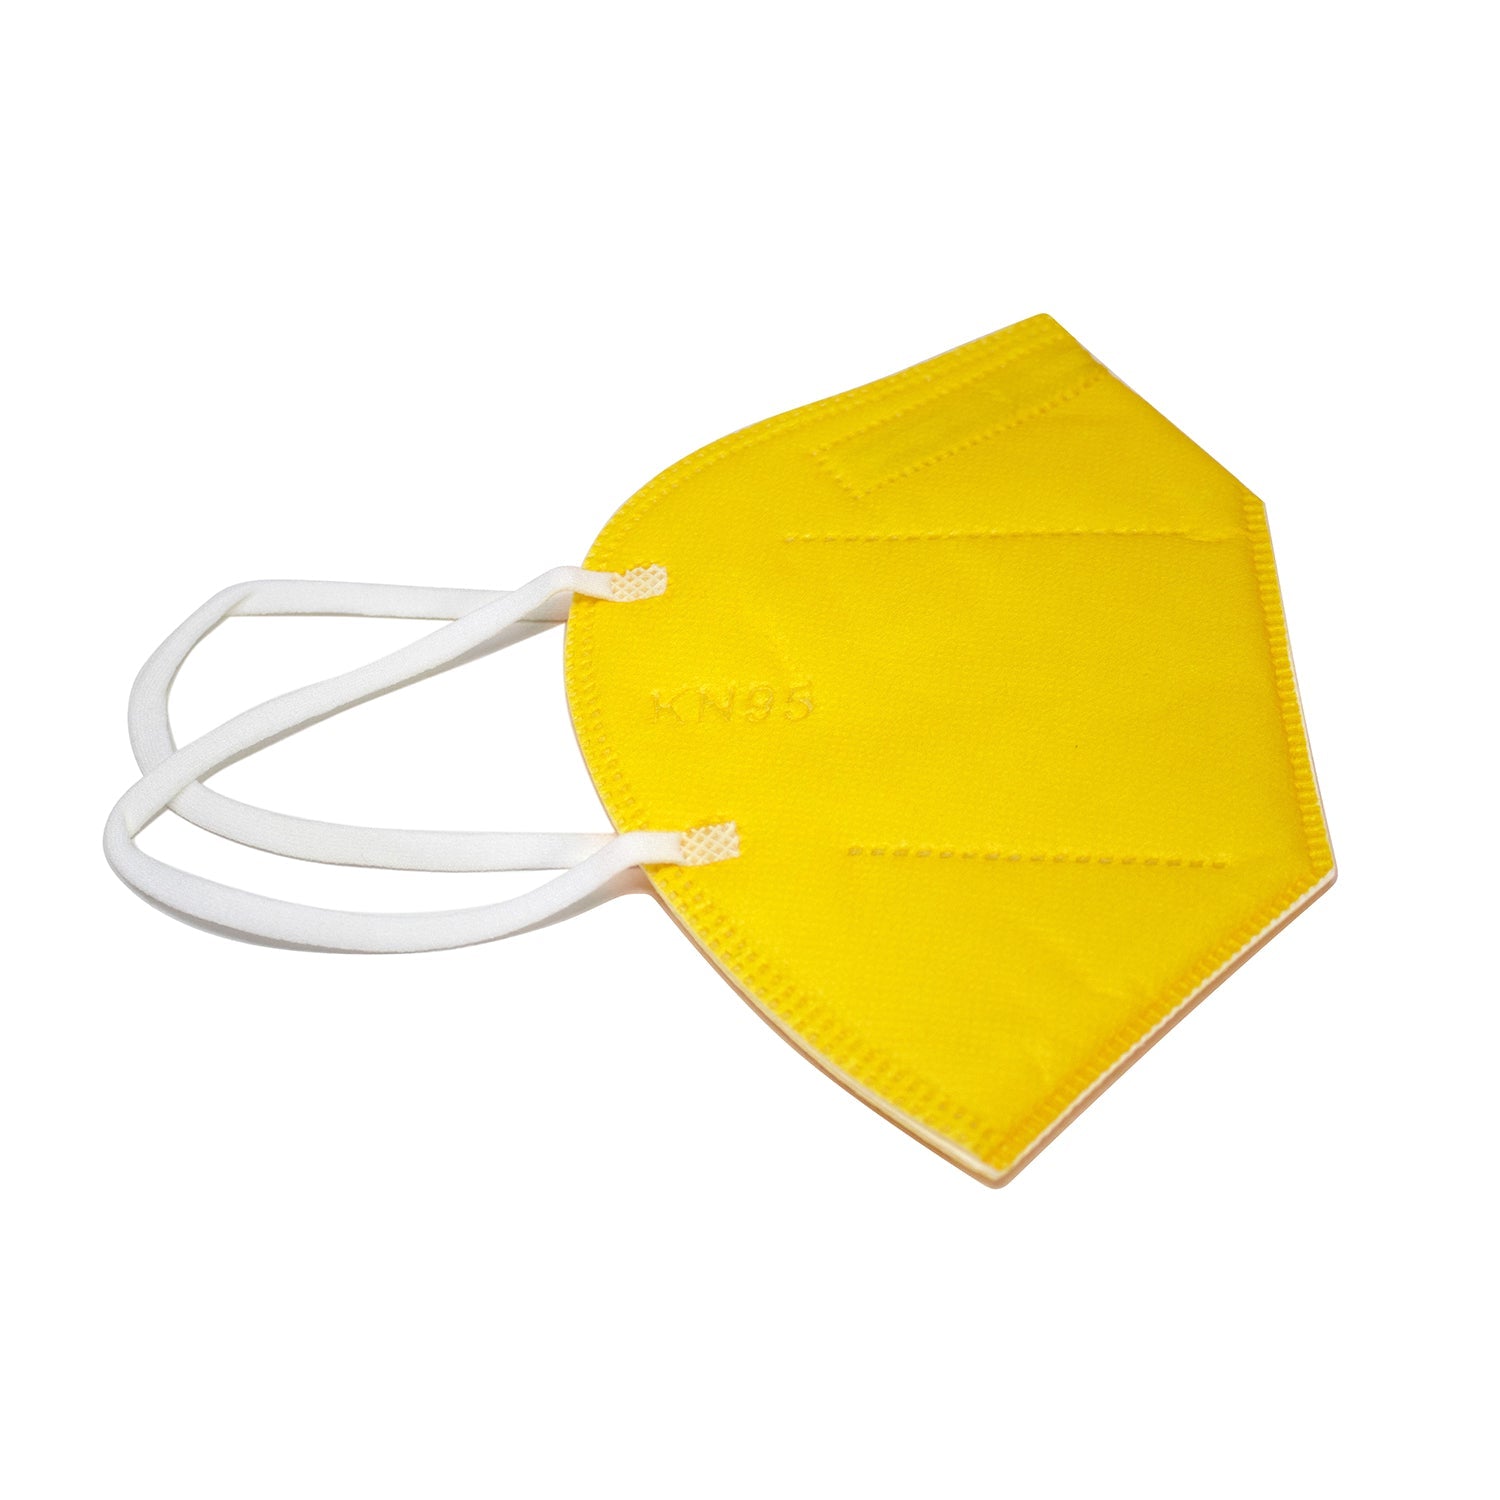 Safe KN95 mask with solid bright yellow design with white straps. Reusable mask, strong elastic straps. 